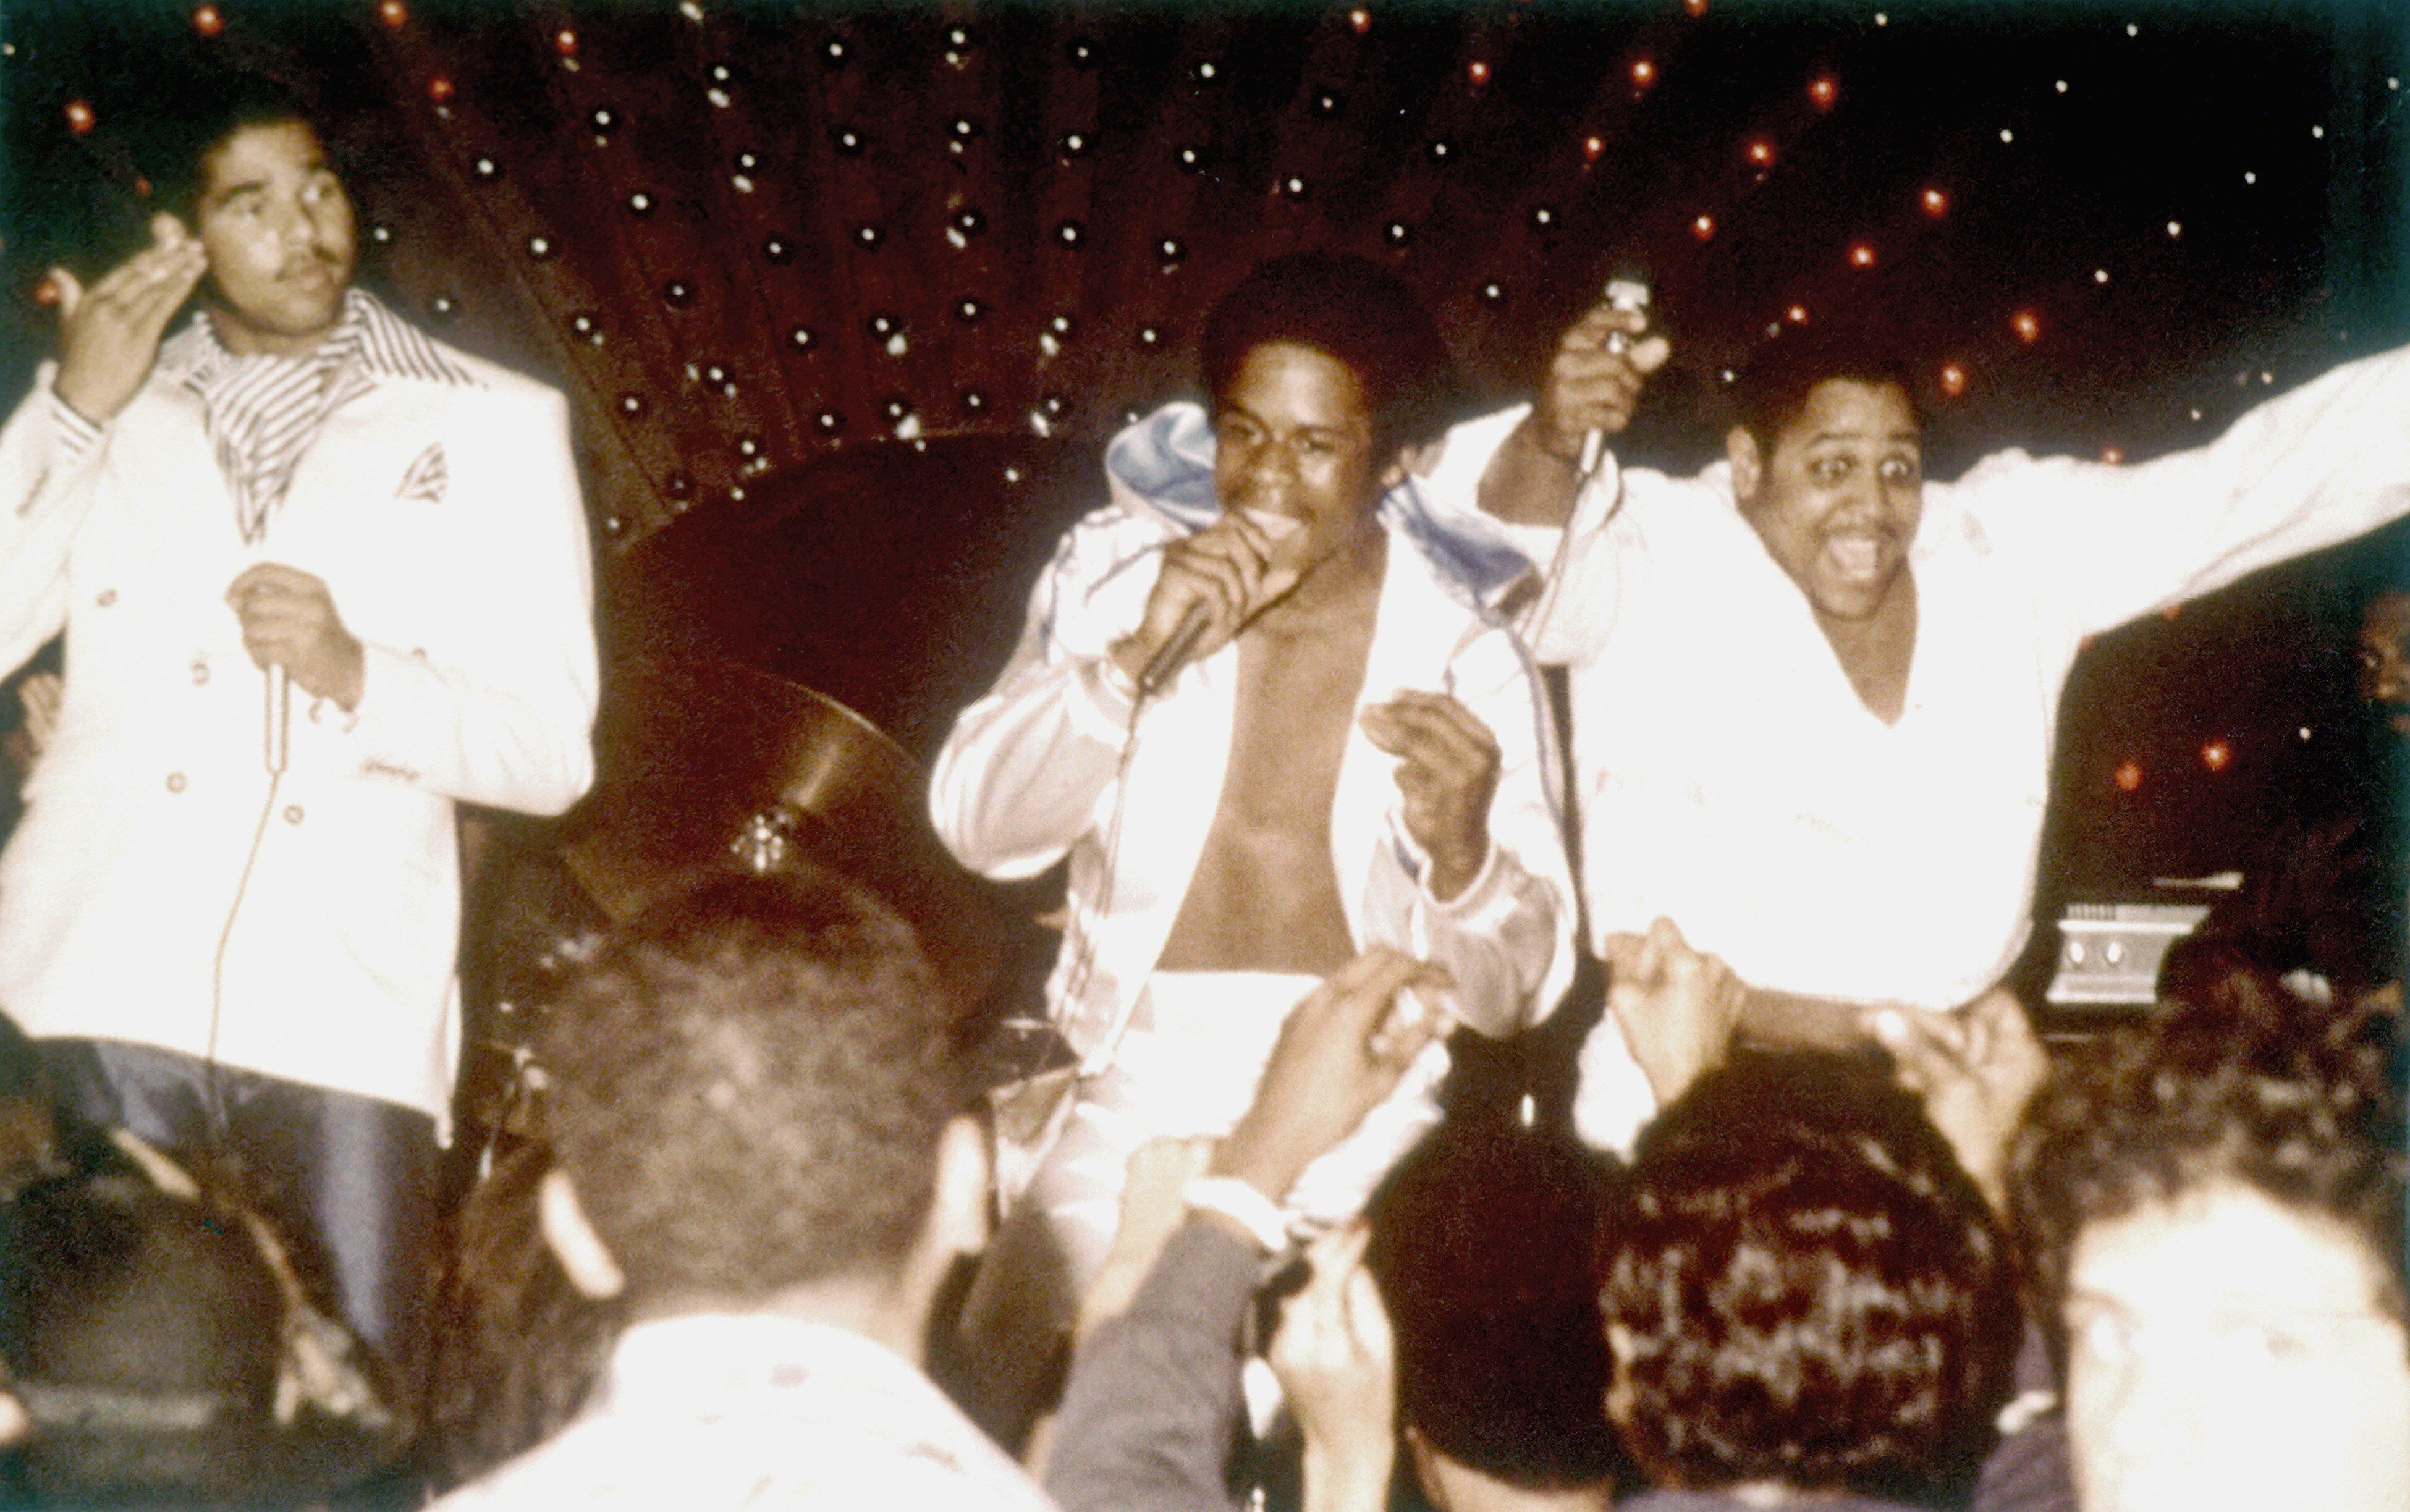 Sugar Hill Gang (L-R Michael "Wonder Mike" Wright, Guy "Master Gee' O'Brian and Henry "Big Bank" Jackson) perform on stage circa late 1970's in New York.